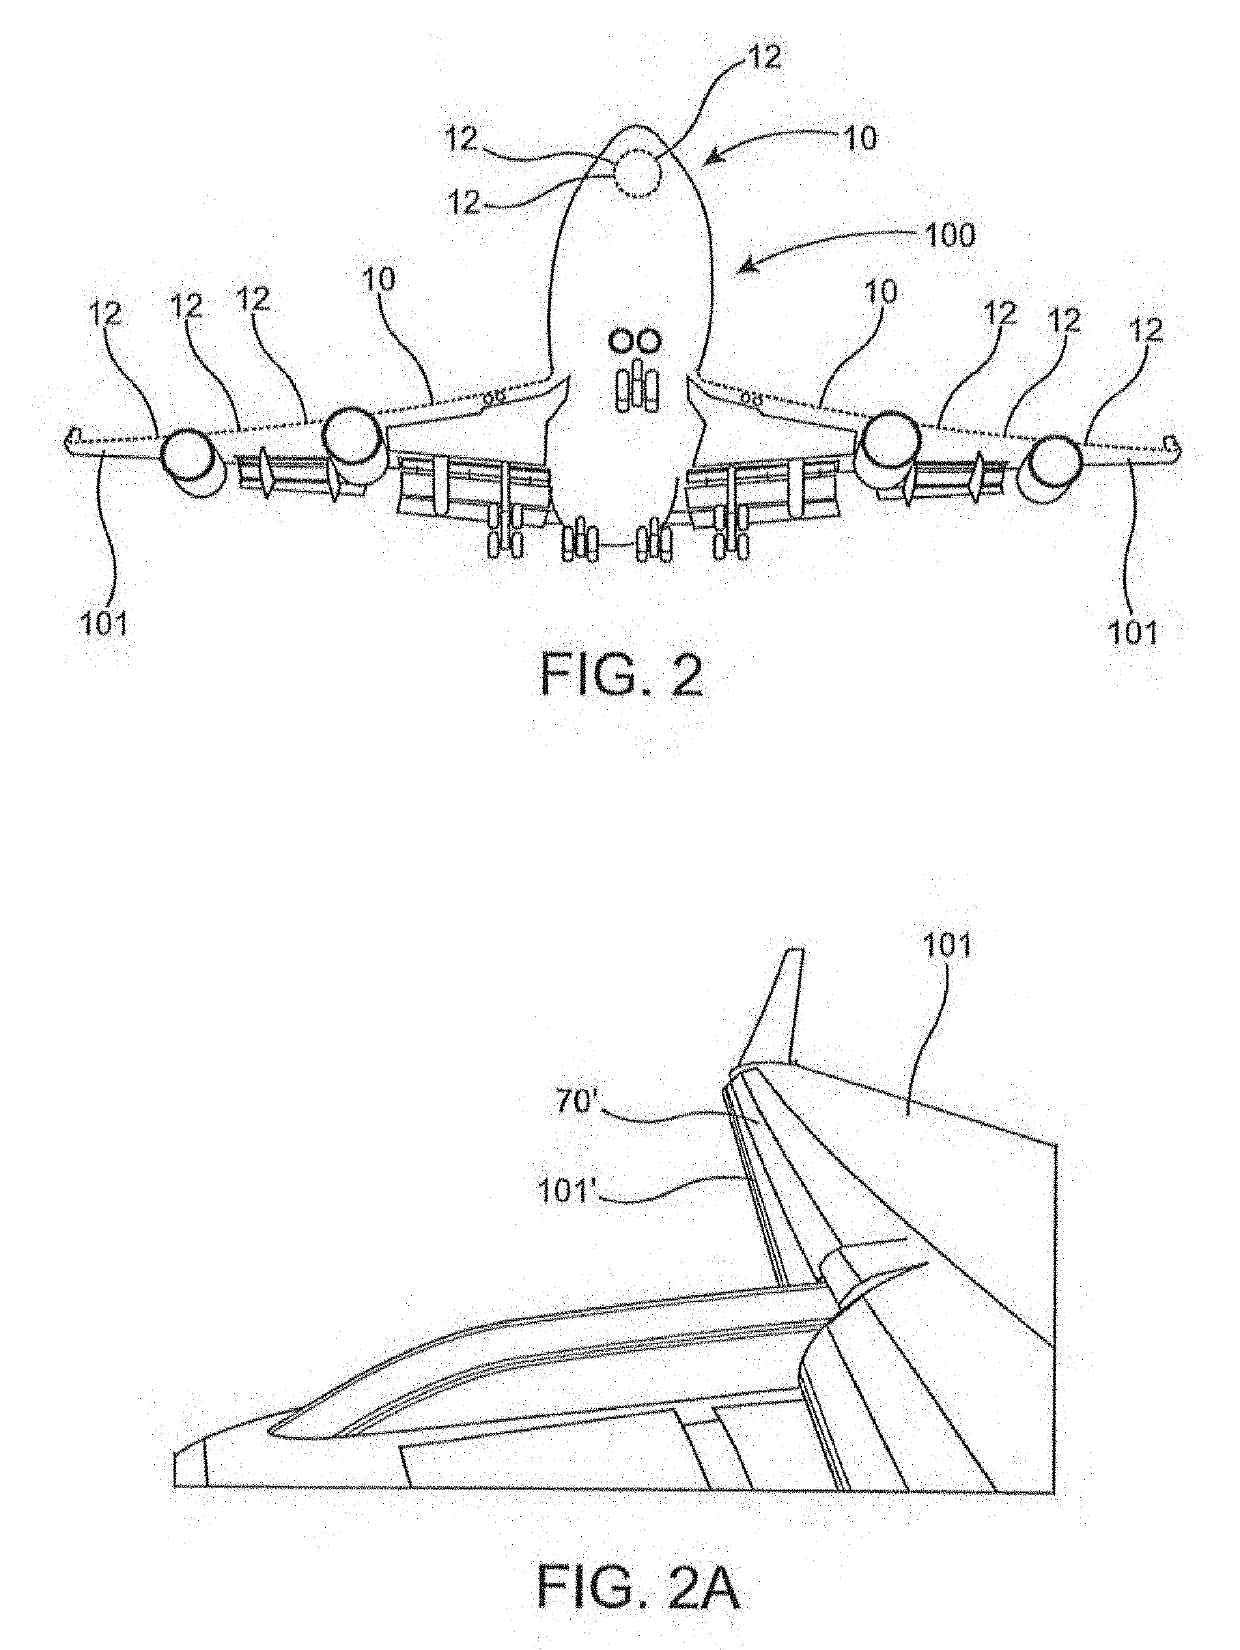 System for protecting aircraft against bird strikes